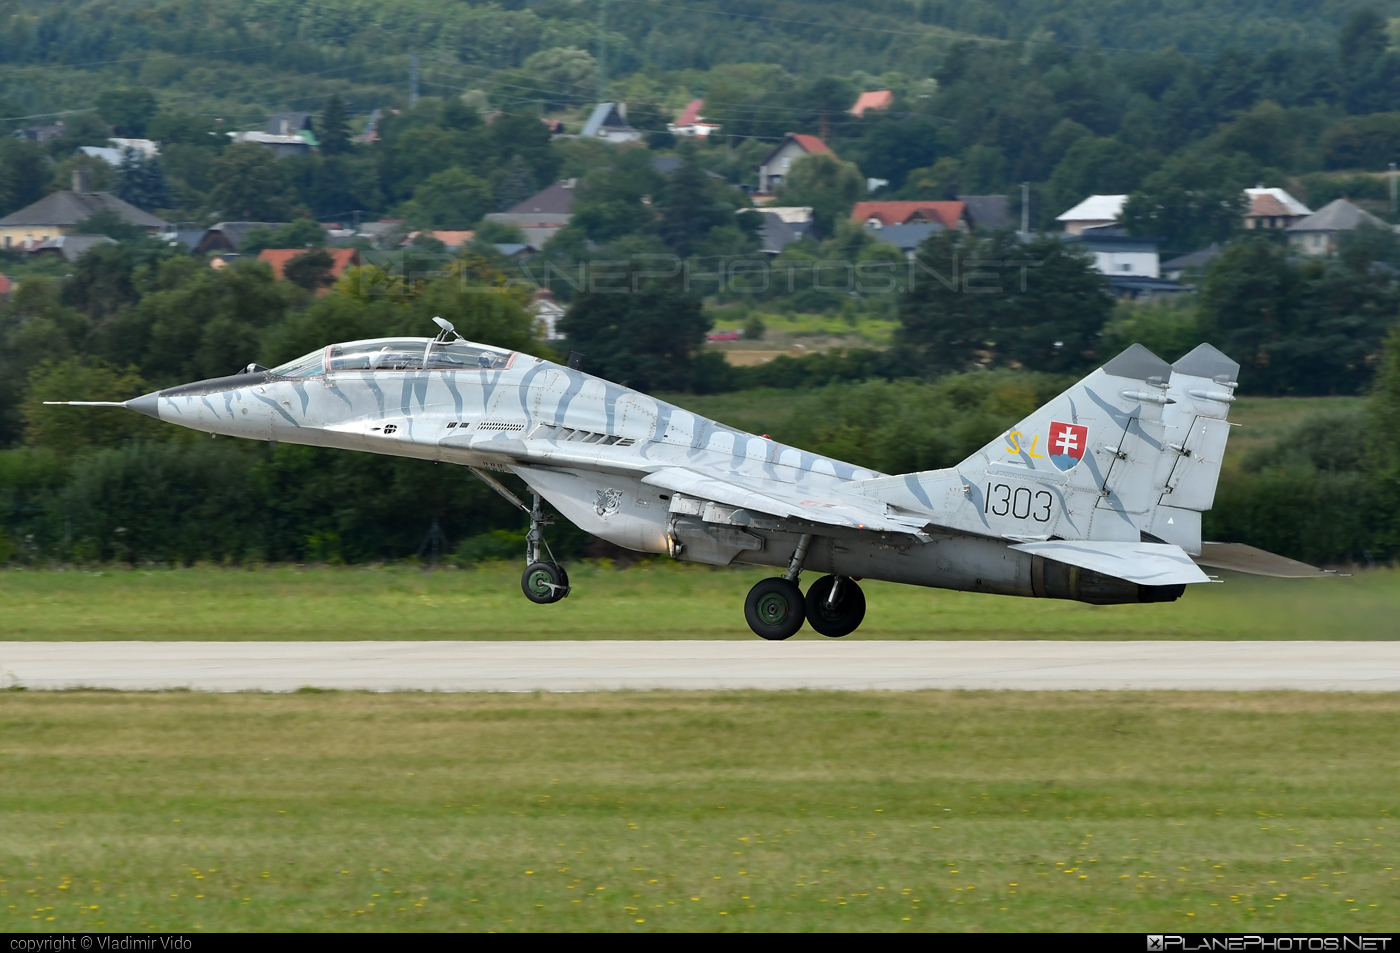 Mikoyan-Gurevich MiG-29UBS - 1303 operated by Vzdušné sily OS SR (Slovak Air Force) #mig #mig29 #mig29ubs #mikoyangurevich #siaf2019 #slovakairforce #vzdusnesilyossr